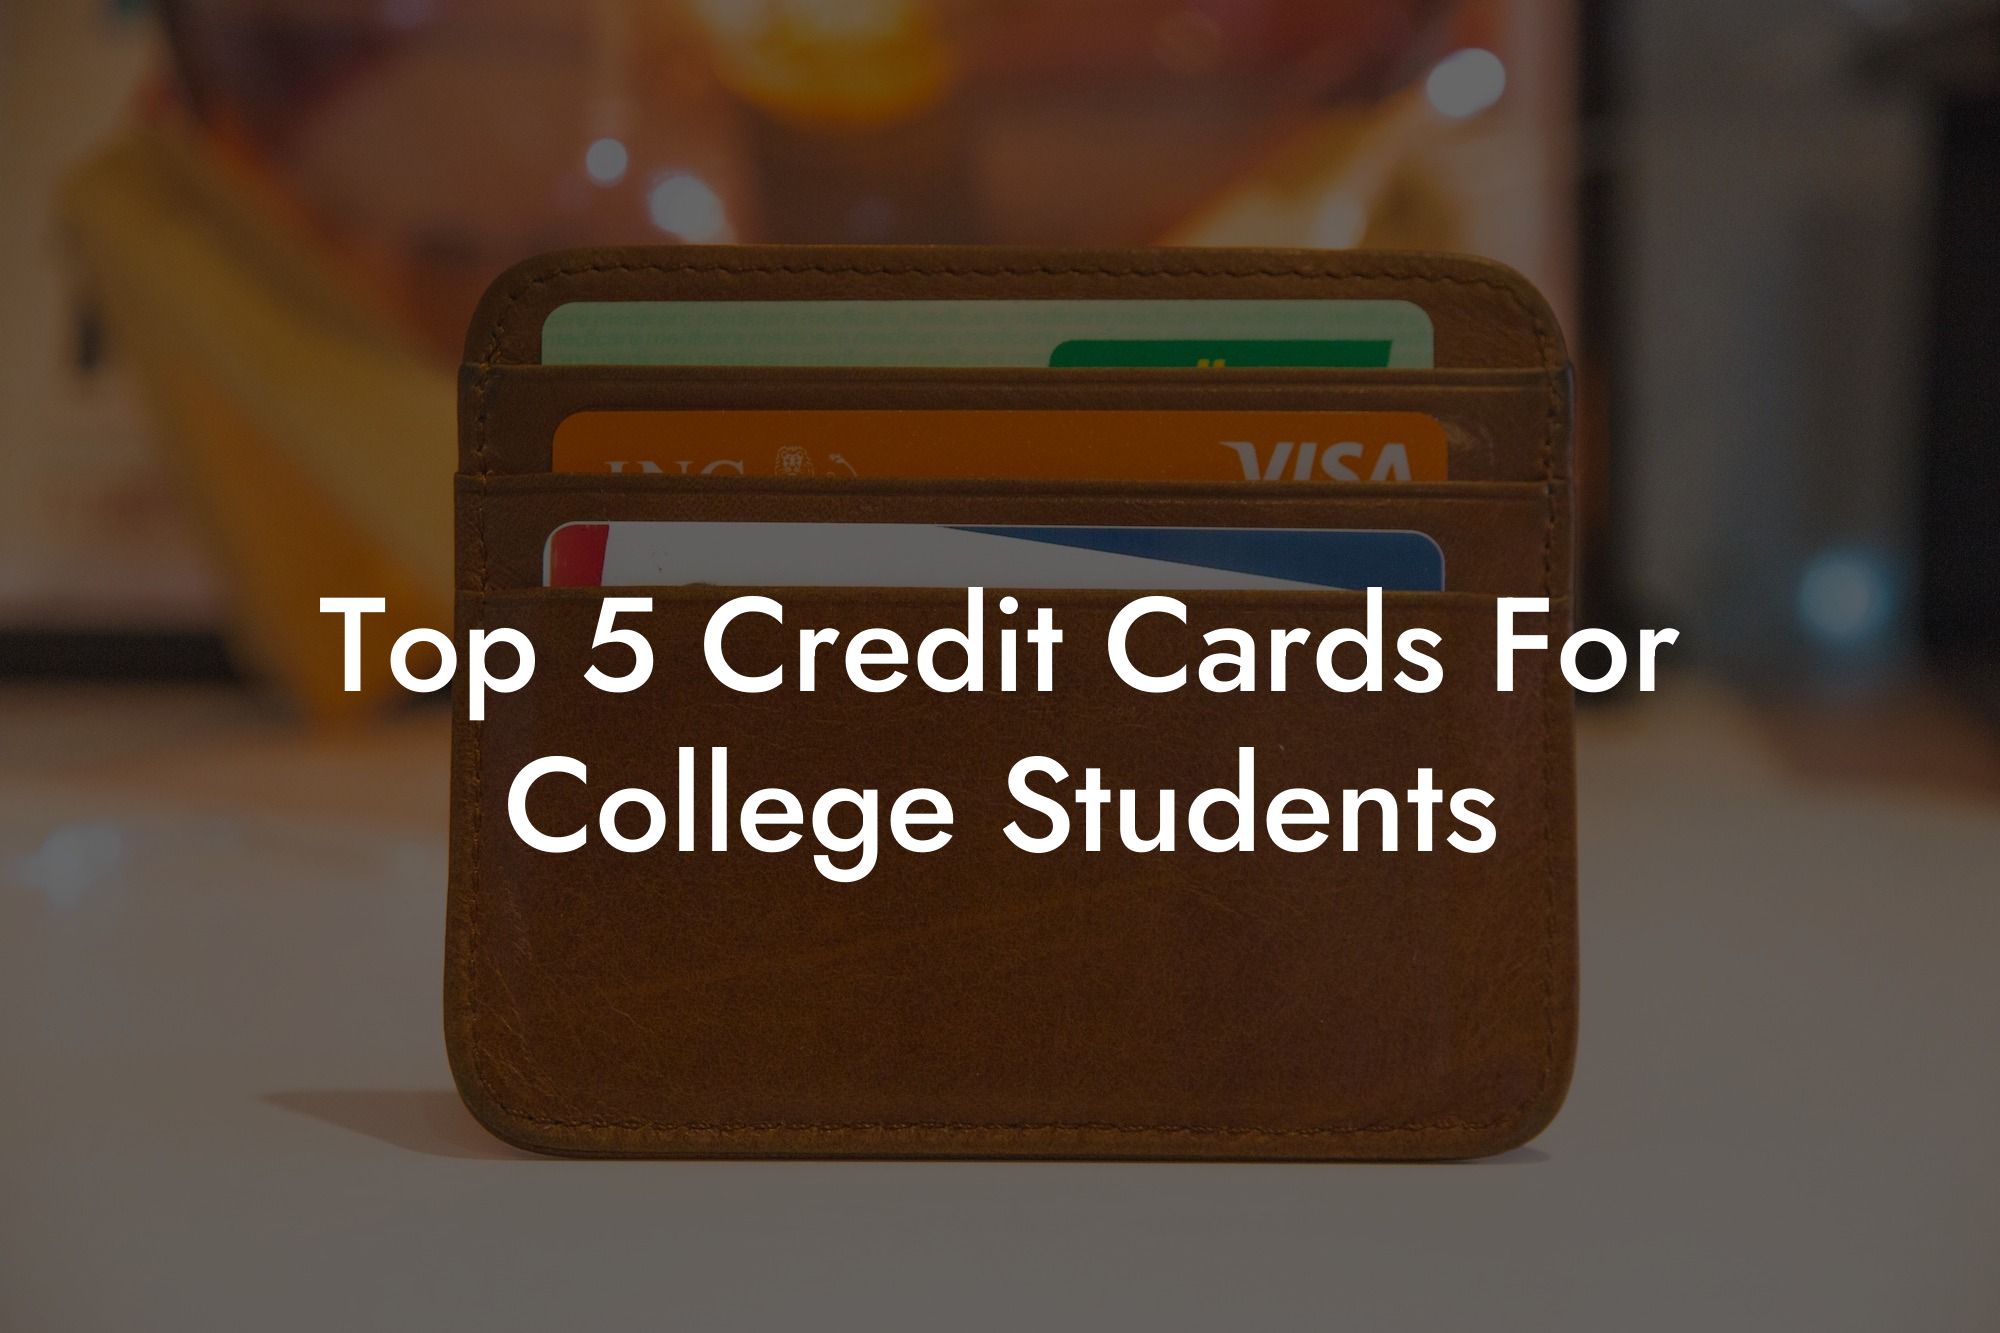 Top 5 Credit Cards For College Students